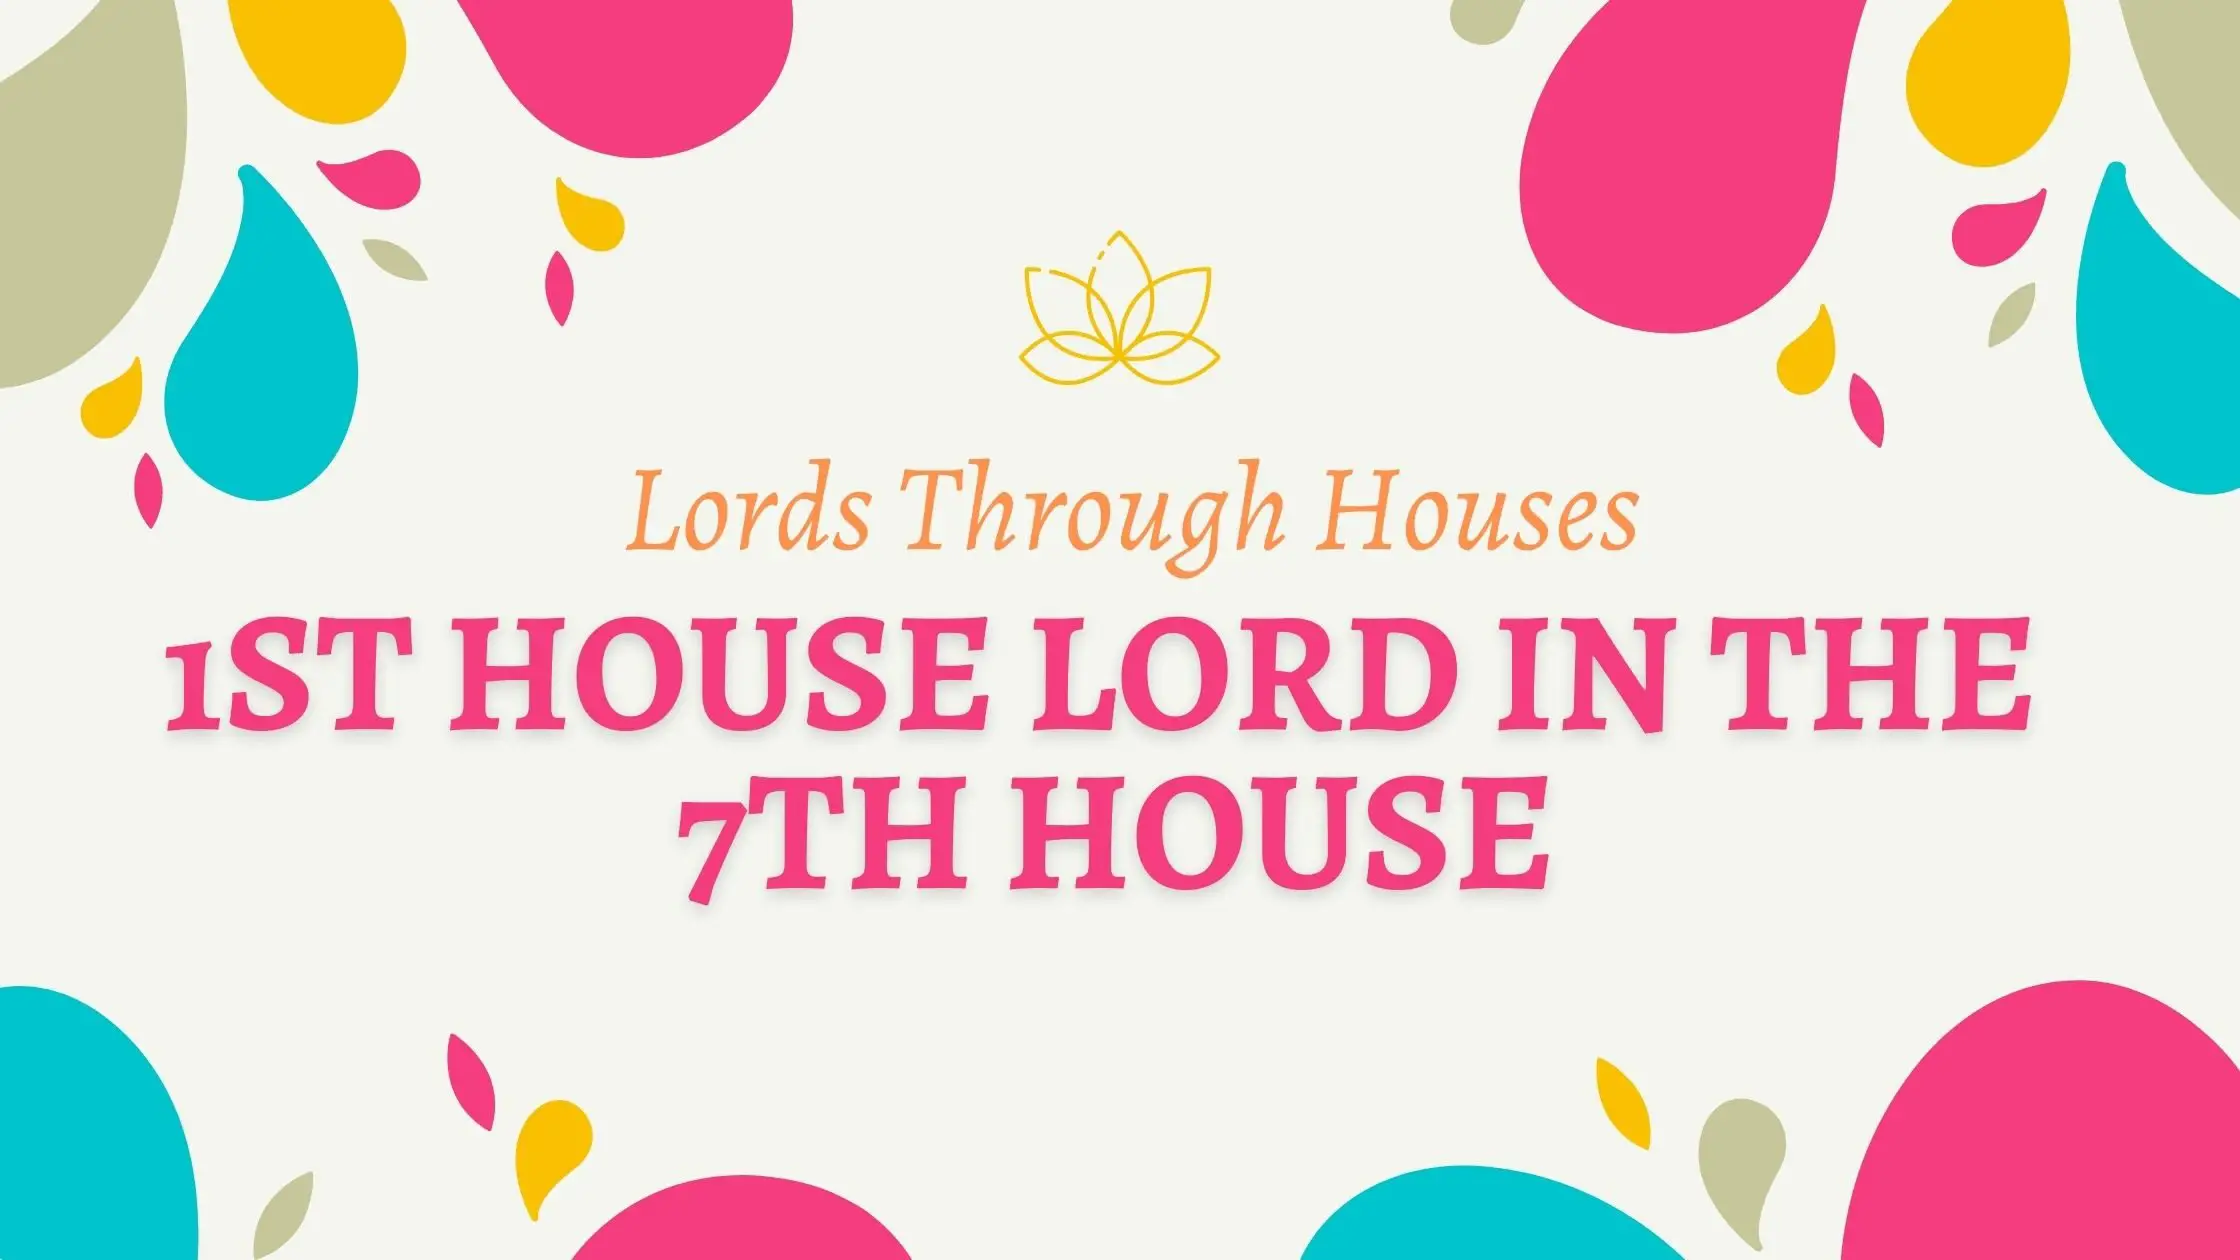 1st house lord in the 7th house